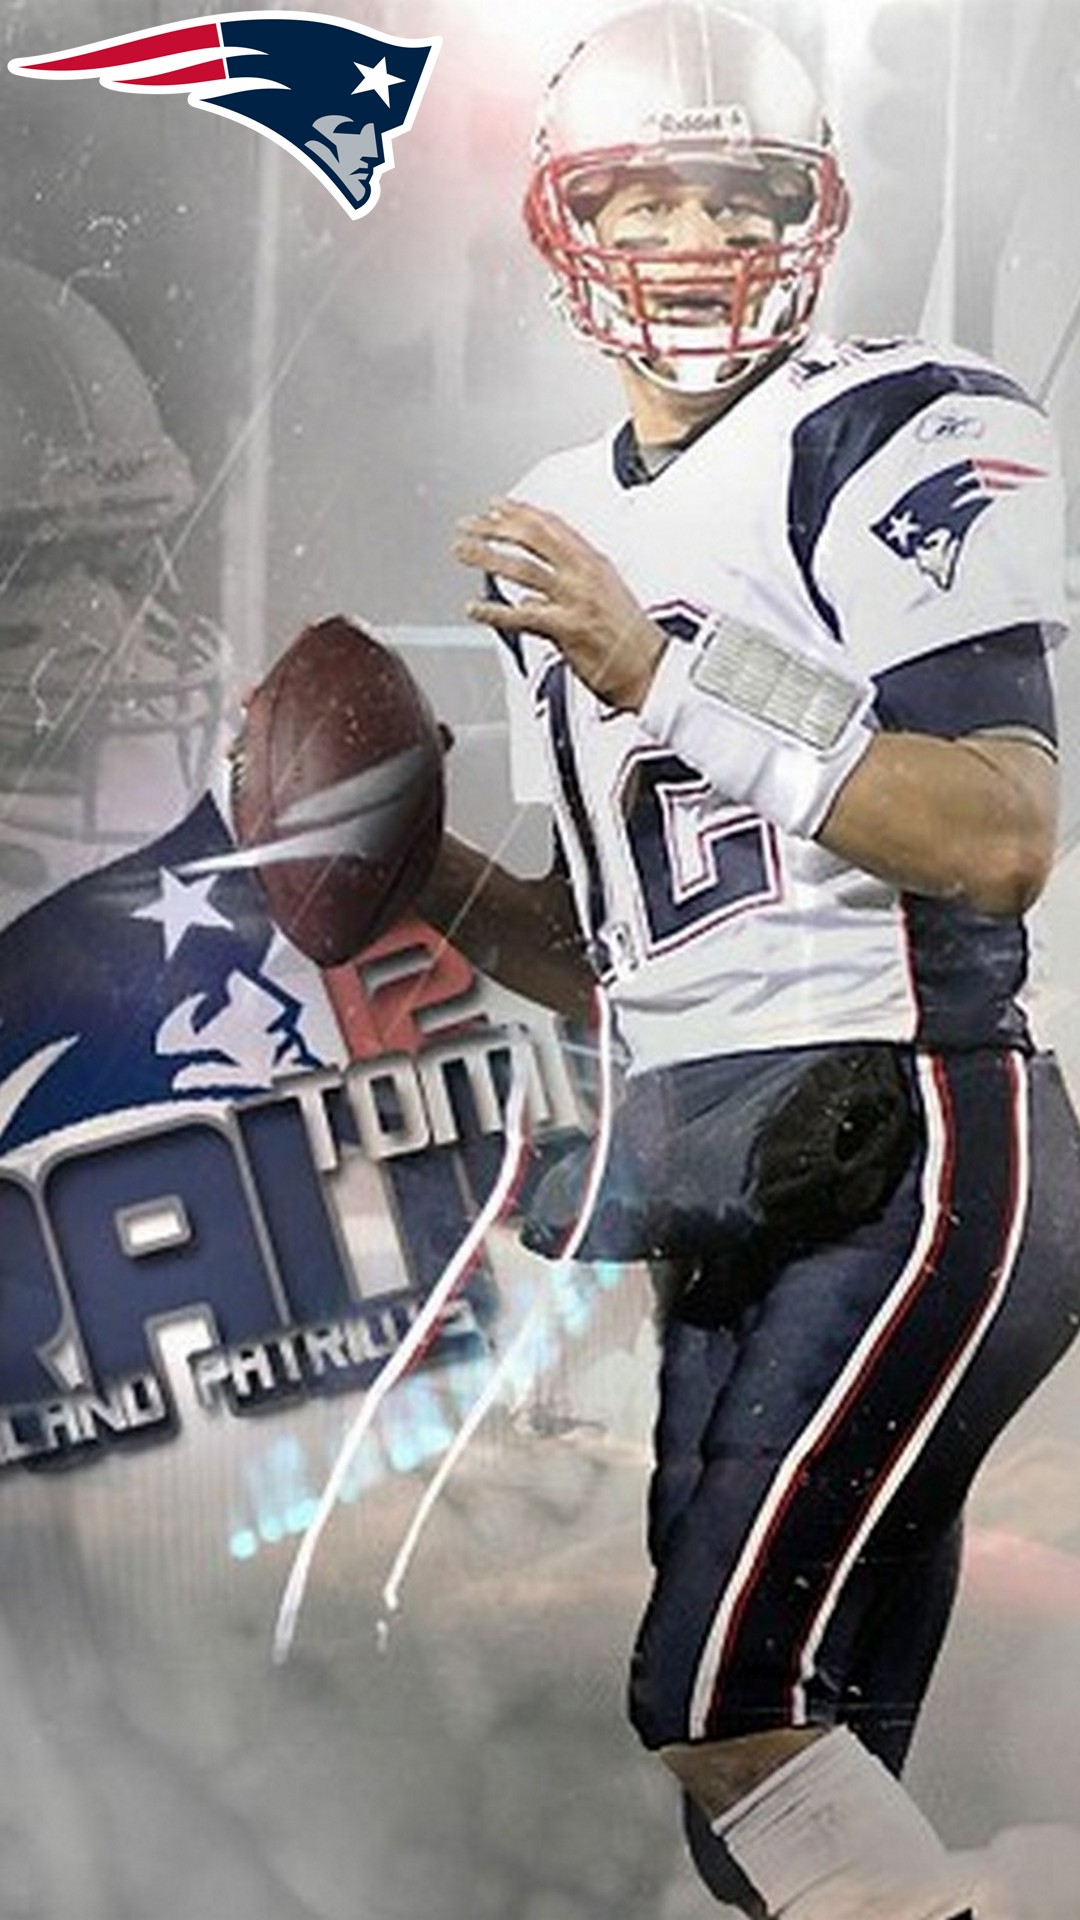 Tom Brady Patriots iPhone 8 Wallpaper With Resolution 1080X1920 pixel. You can make this wallpaper for your Mac or Windows Desktop Background, iPhone, Android or Tablet and another Smartphone device for free